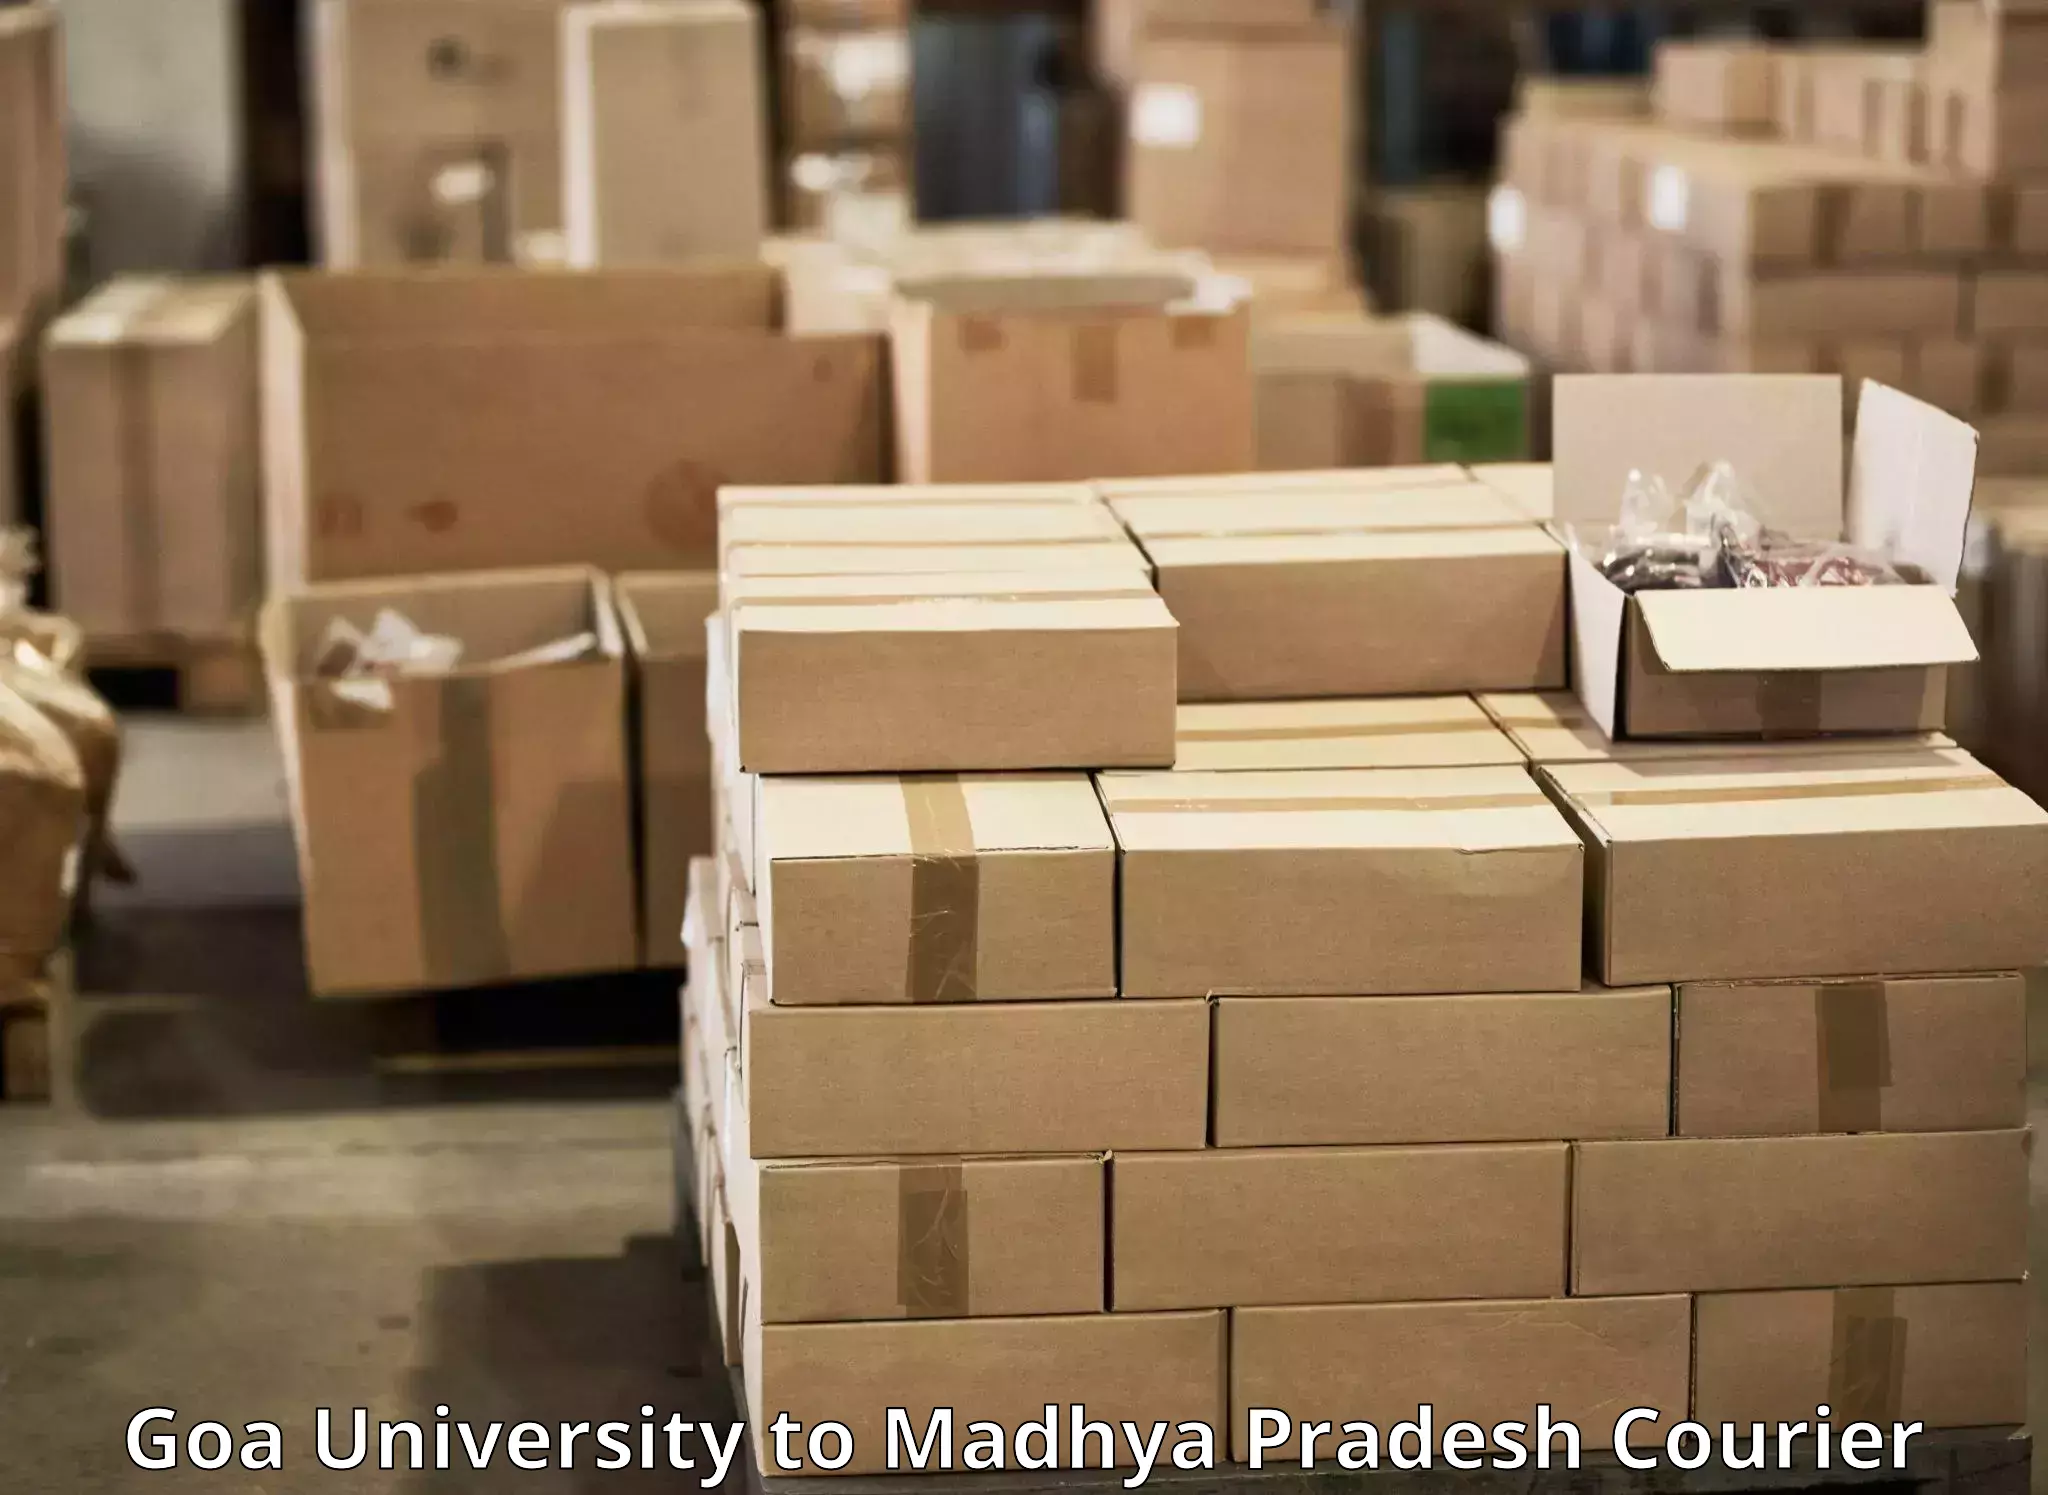 Multi-national courier services Goa University to Sheopur